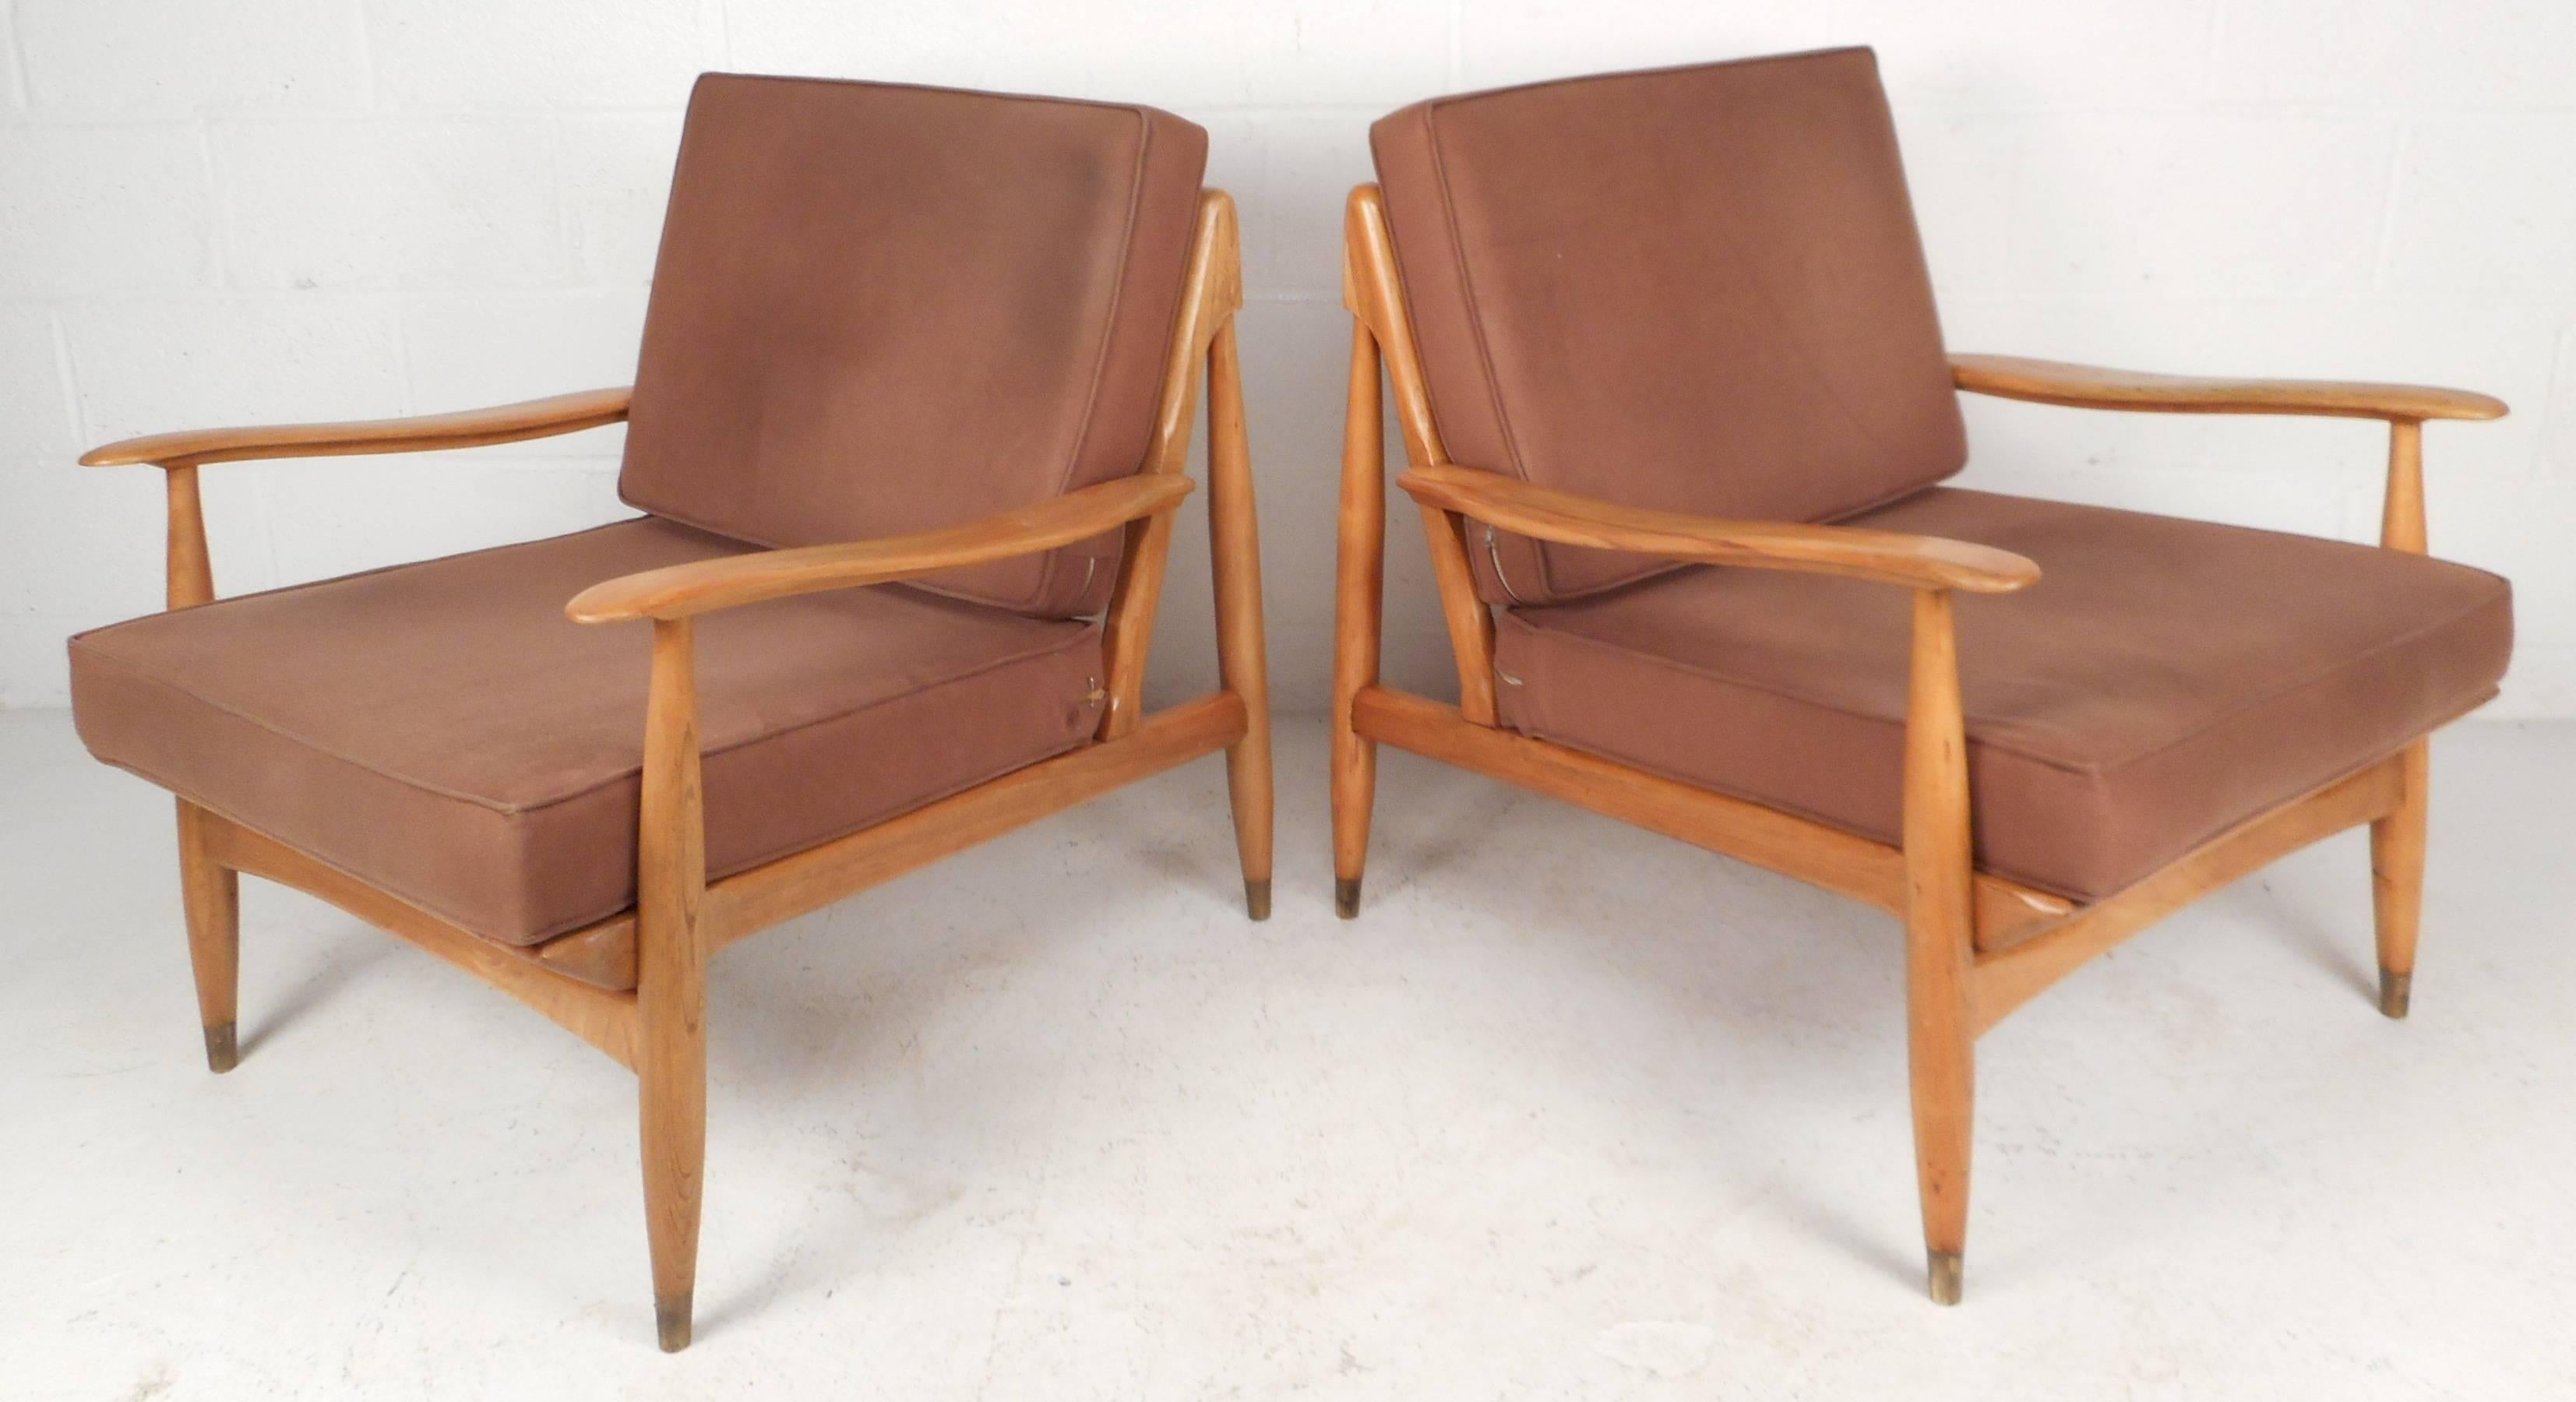 Beautiful pair of Mid-Century Modern lounge chairs feature a solid oak frame and sculpted armrests. Sleek design has tapered legs with brass caps on the feet. The thick cushions, wide seating, and plush upholstery ensure comfort without sacrificing